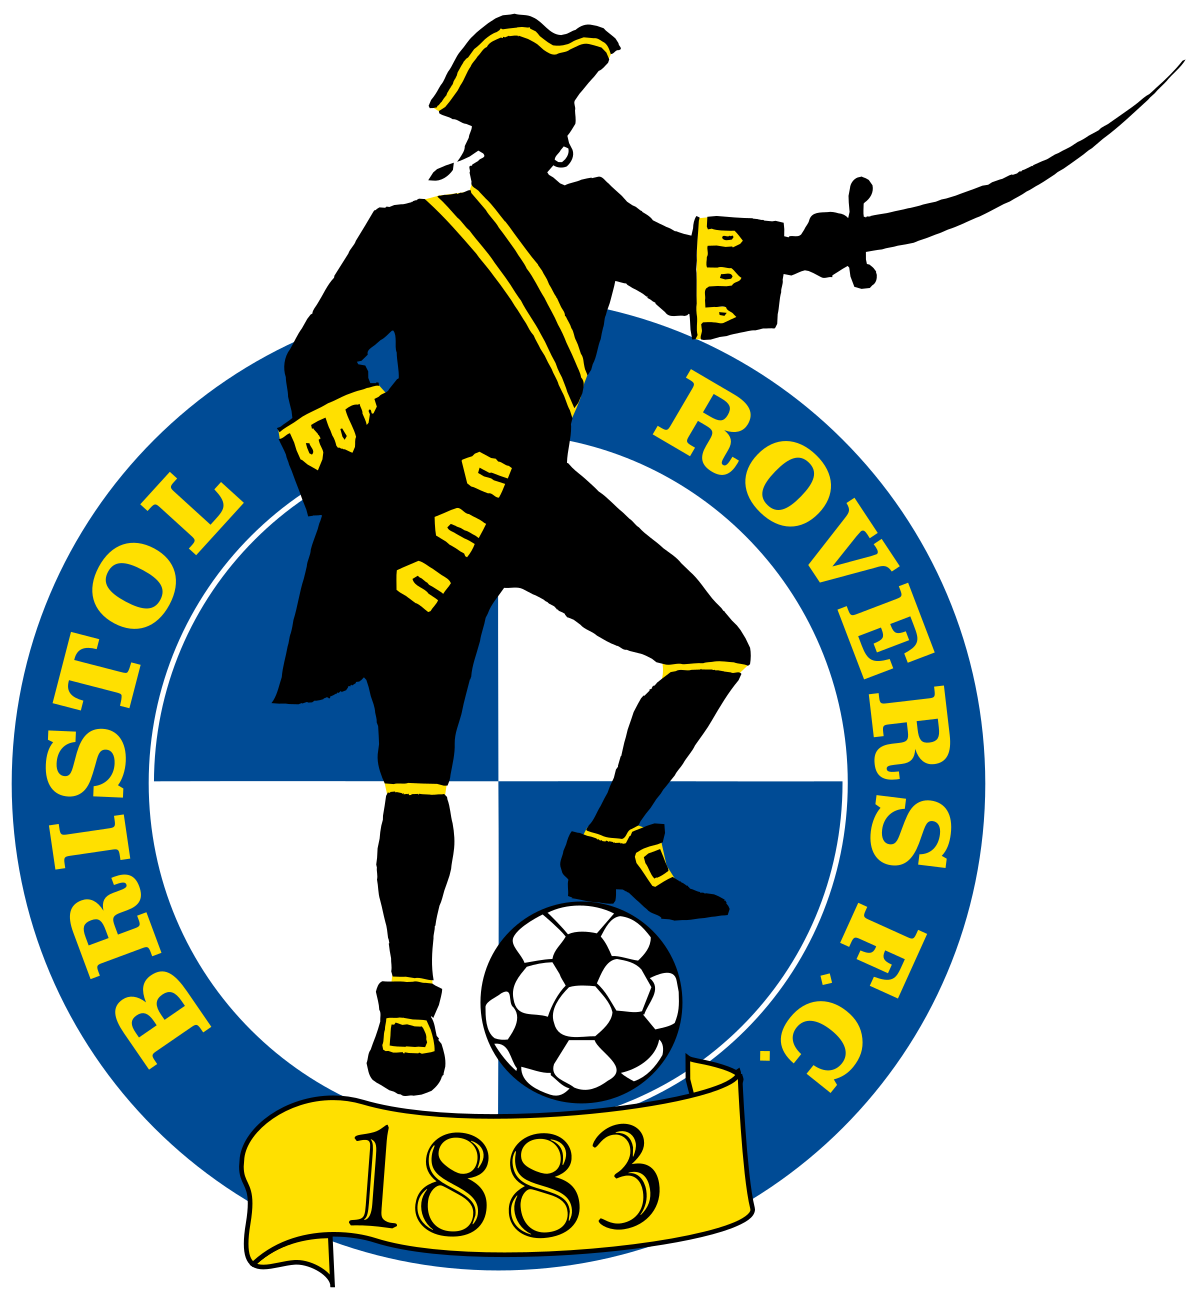 Exclusive:Bristol Rovers after sack of coach about to confirm very experienced manager